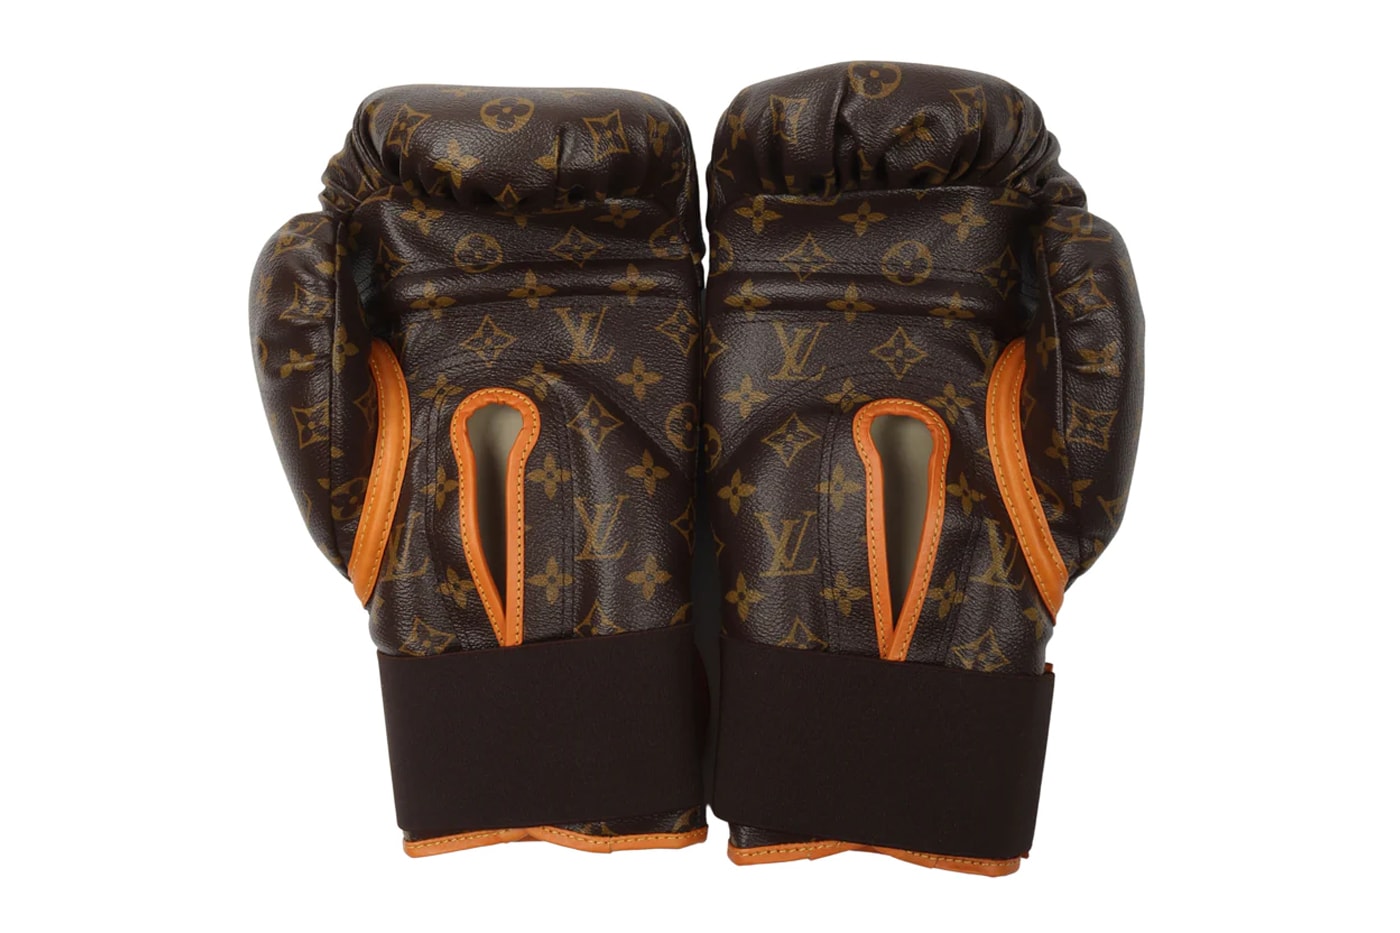 One-of-a-Kind Karl Lagerfeld Louis Vuitton Boxing Gloves Can Be Yours for $15,000 USD justin reed sale icon iconclasts monogrammed punching trunk lv lvmh